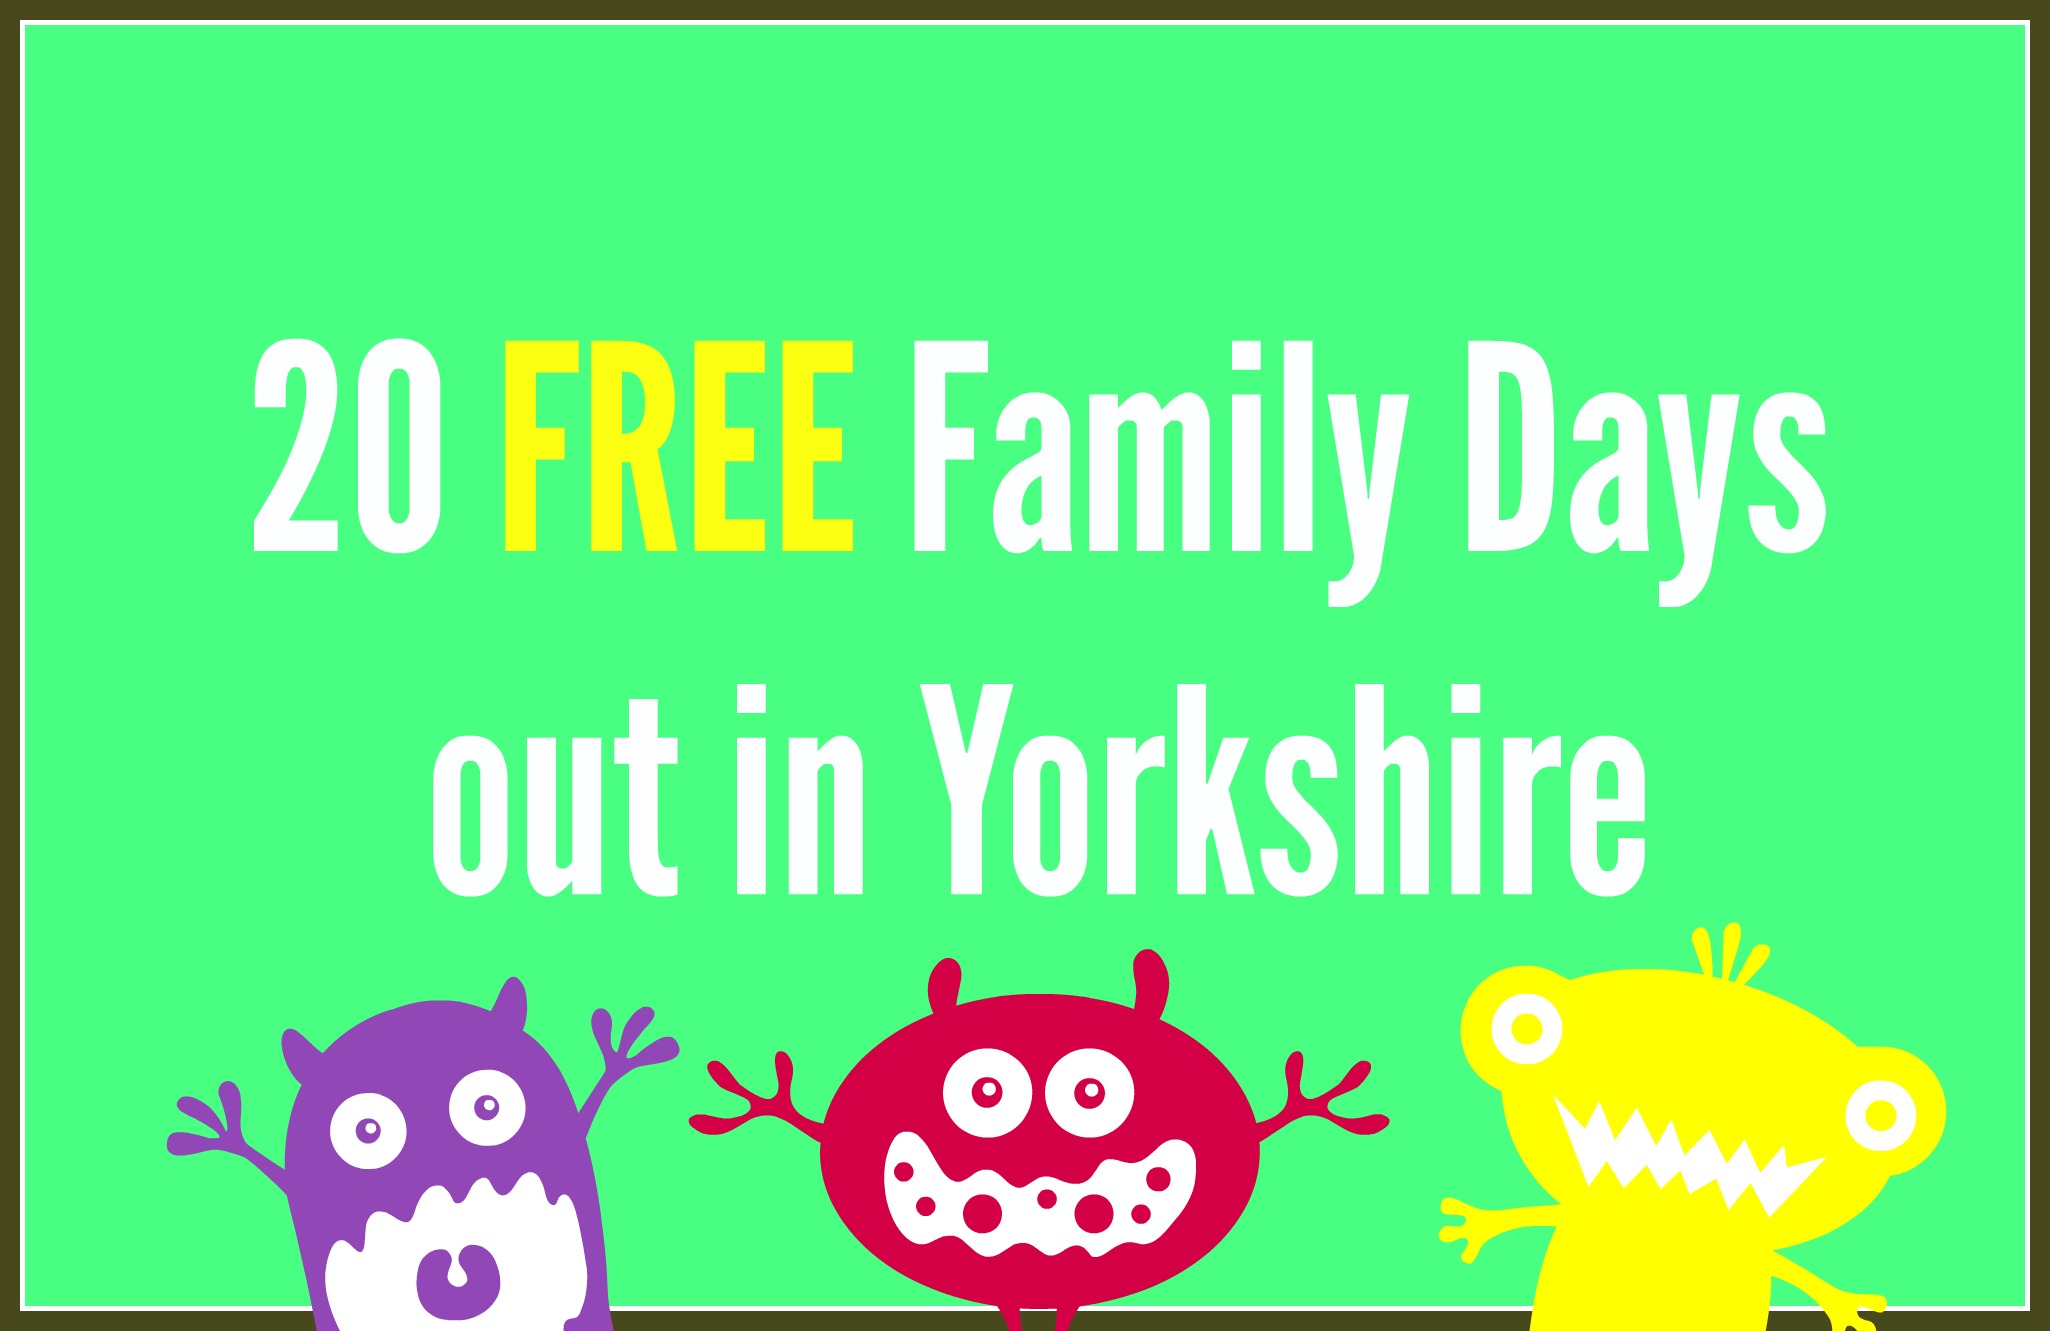 20 FREE family days out in Yorkshire